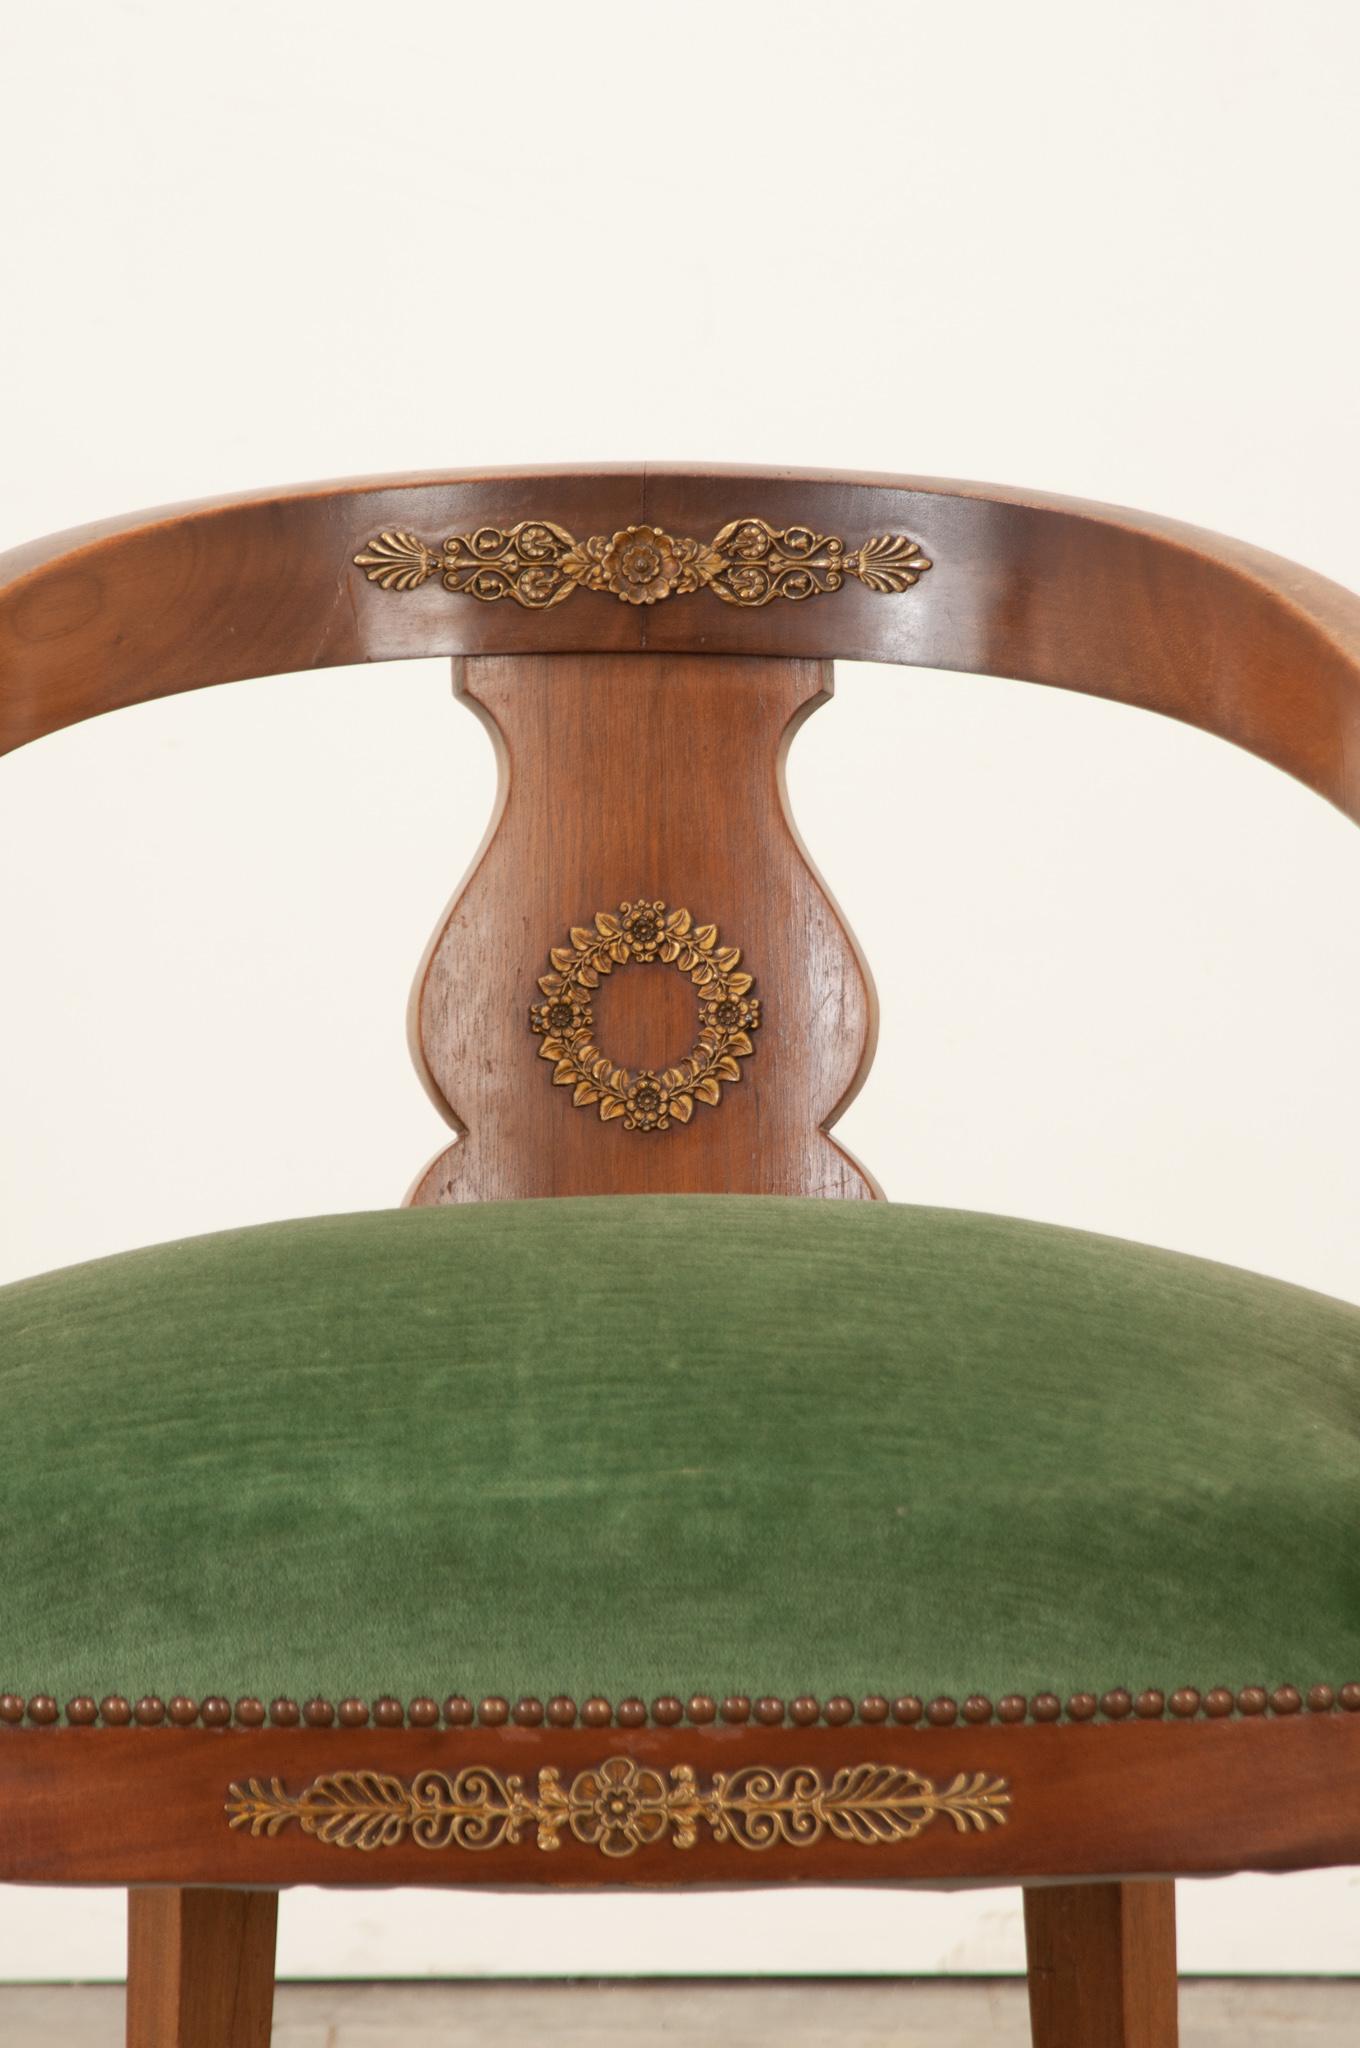 The mahogany frame of this Empire chair has gained a fine patina and is embellished with fantastic ormolu throughout the design. A combination of rosette and palm motifs soften the stalwart design. The green mohair velvet upholstery has held up well